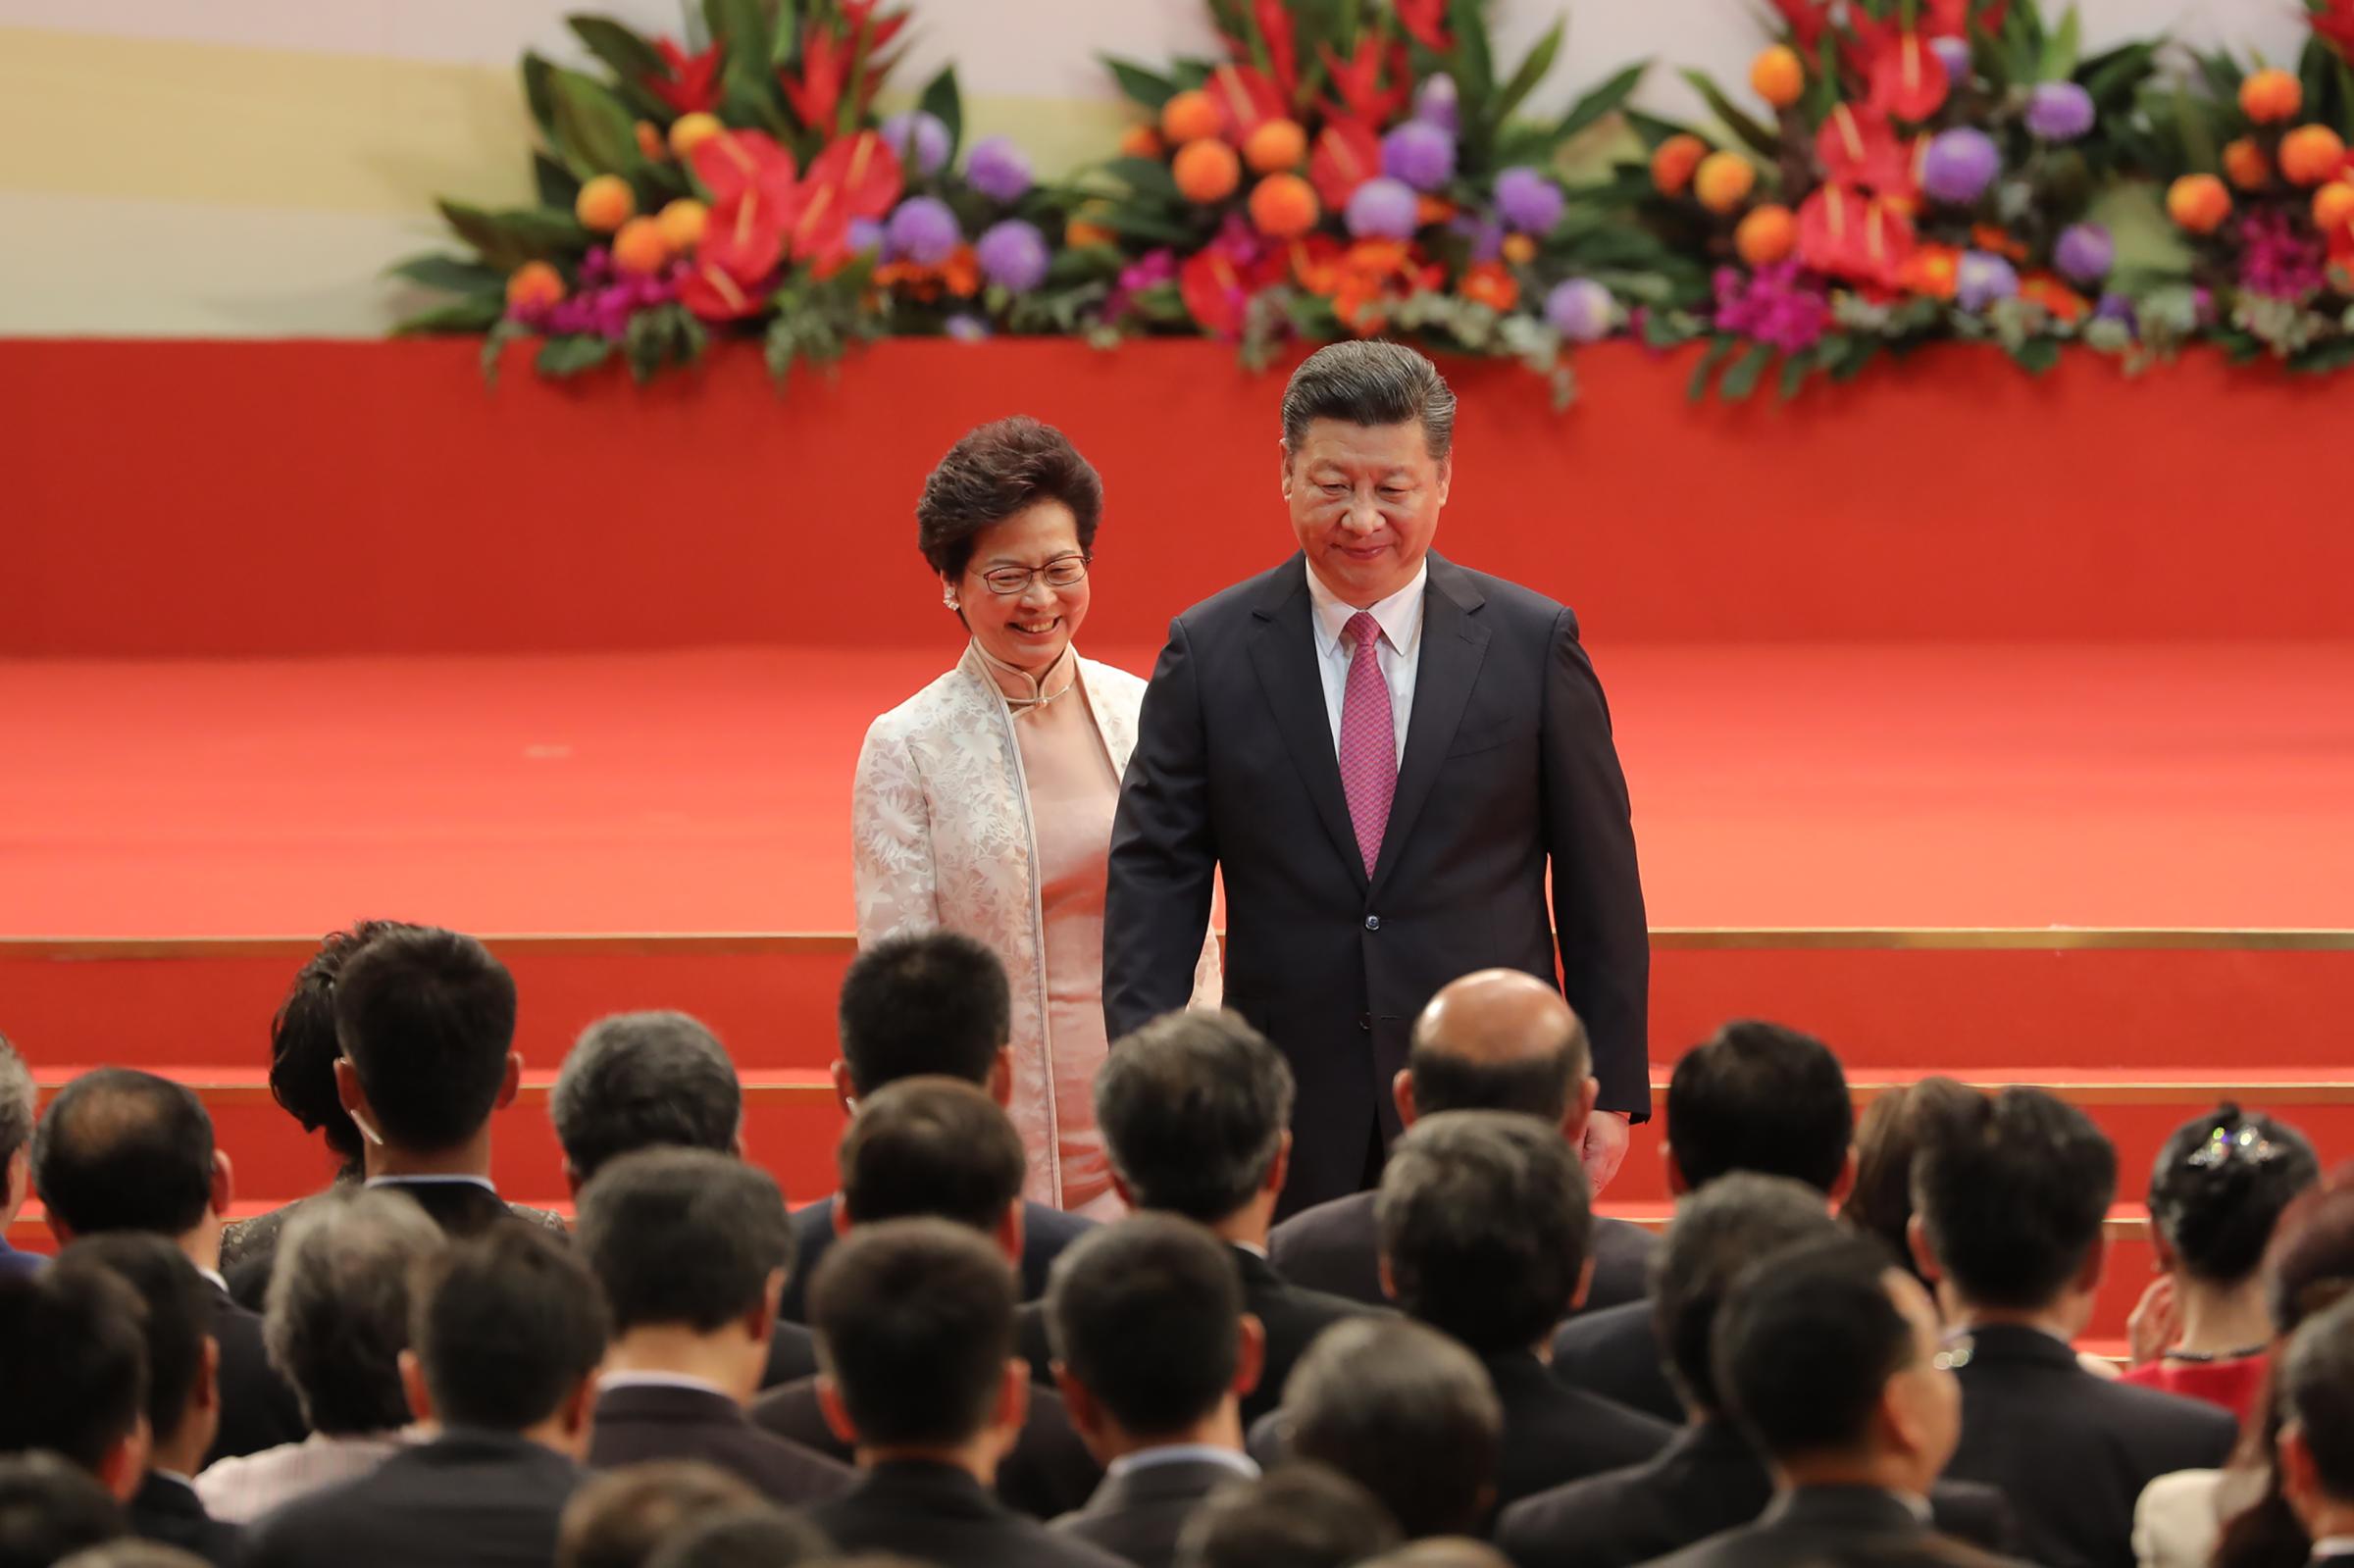 China's President Xi Jinping Officiates Swearing In Ceremony Of Hong Kong's New Government